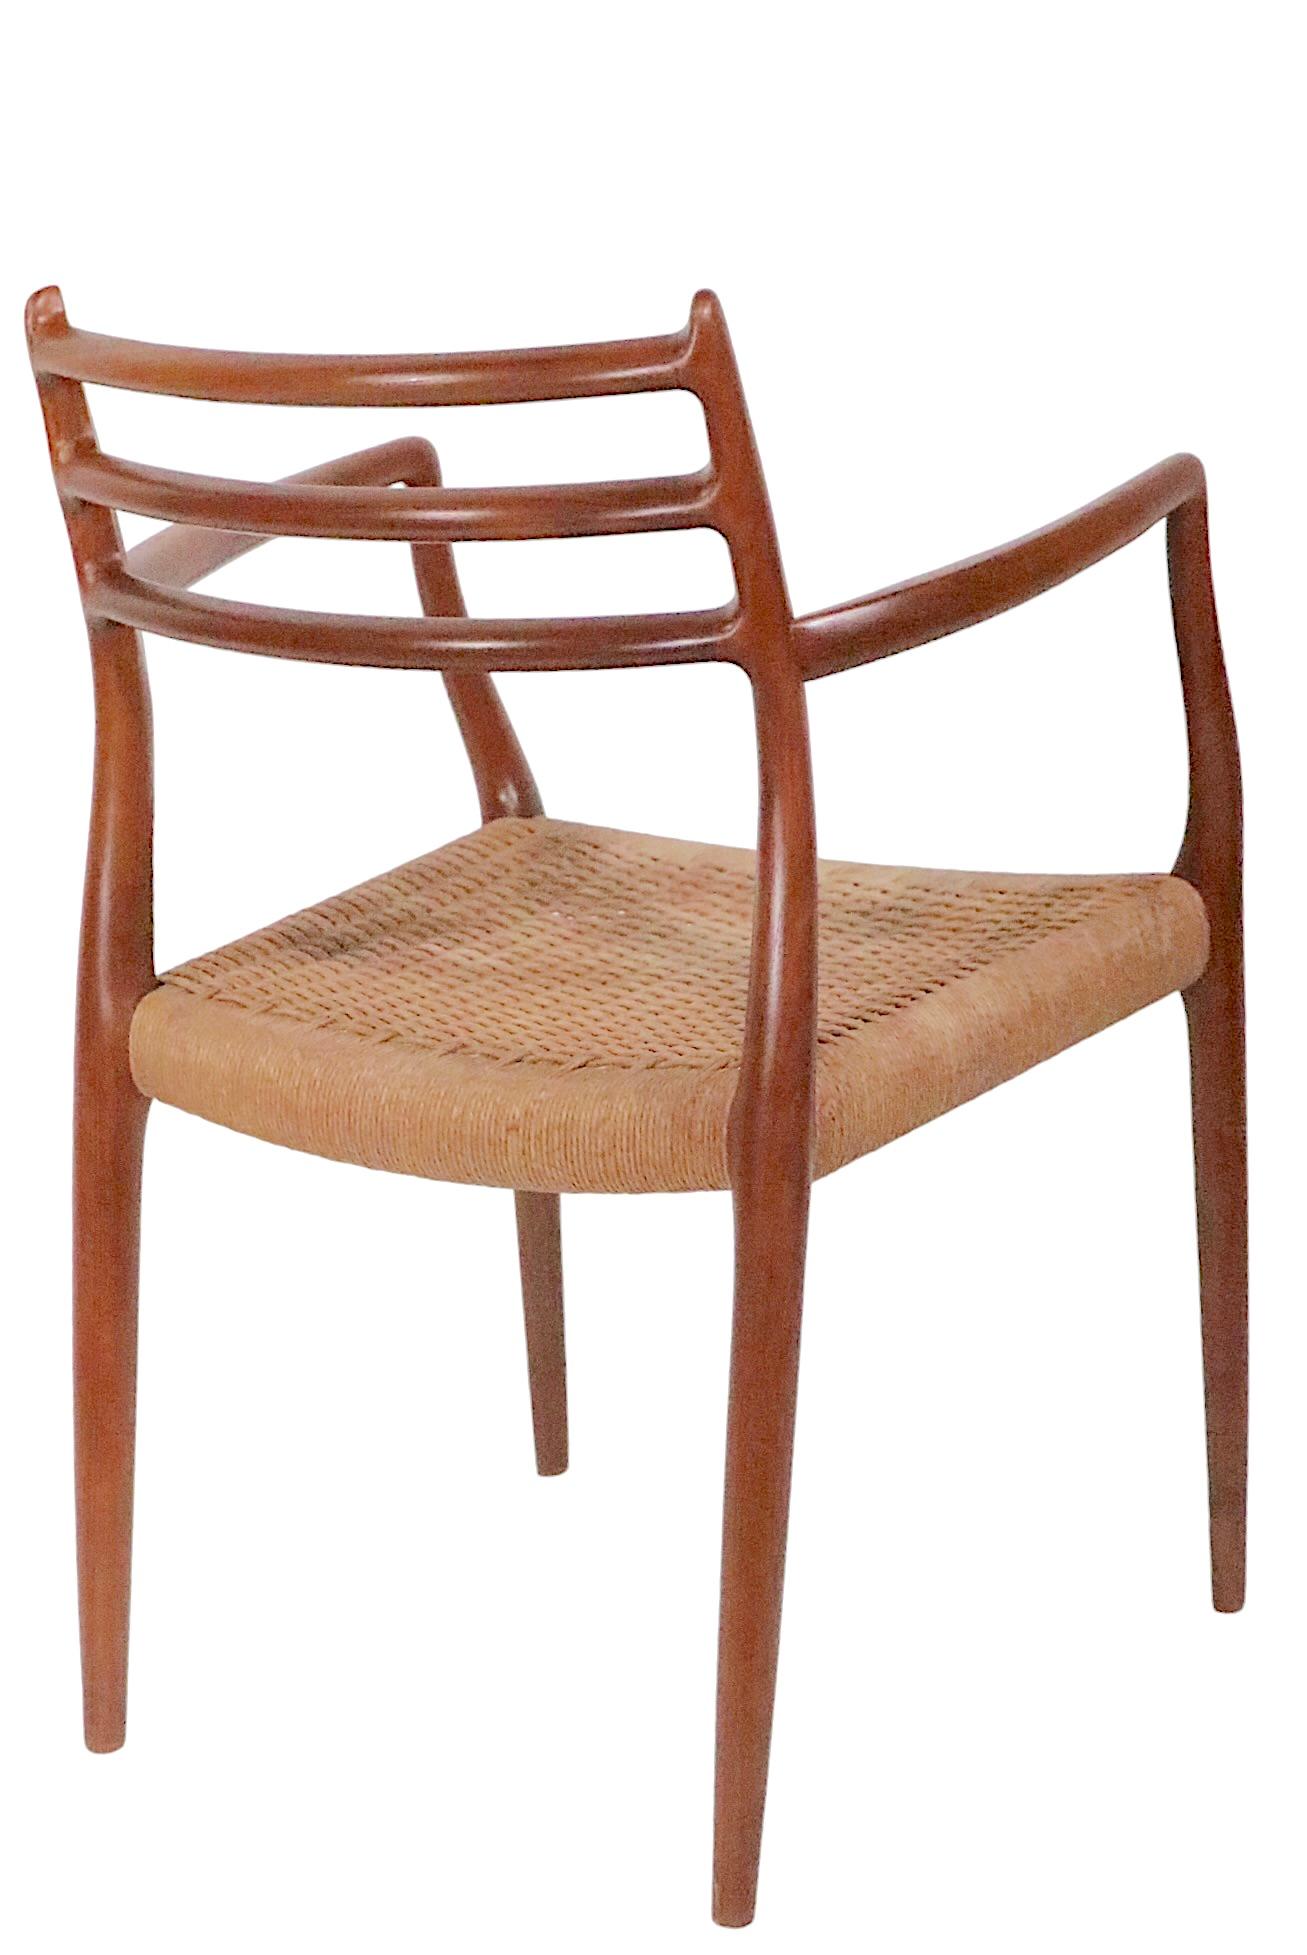 Danish Set of Eight Teak Dining Chairs by Neils Moller / J.L.Moller, circa 1960s For Sale 6